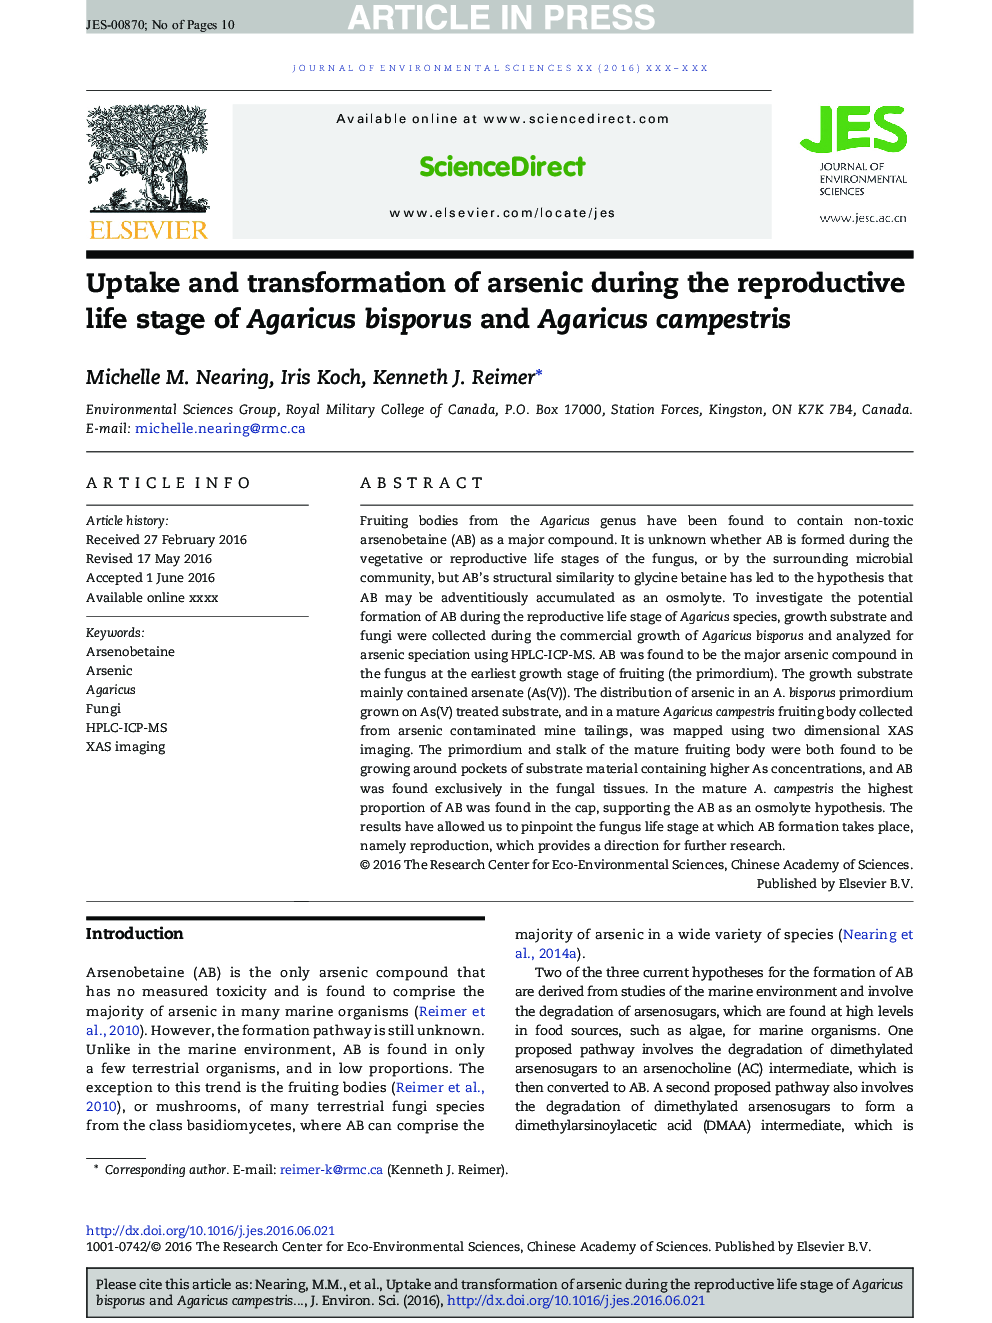 Uptake and transformation of arsenic during the reproductive life stage of Agaricus bisporus and Agaricus campestris